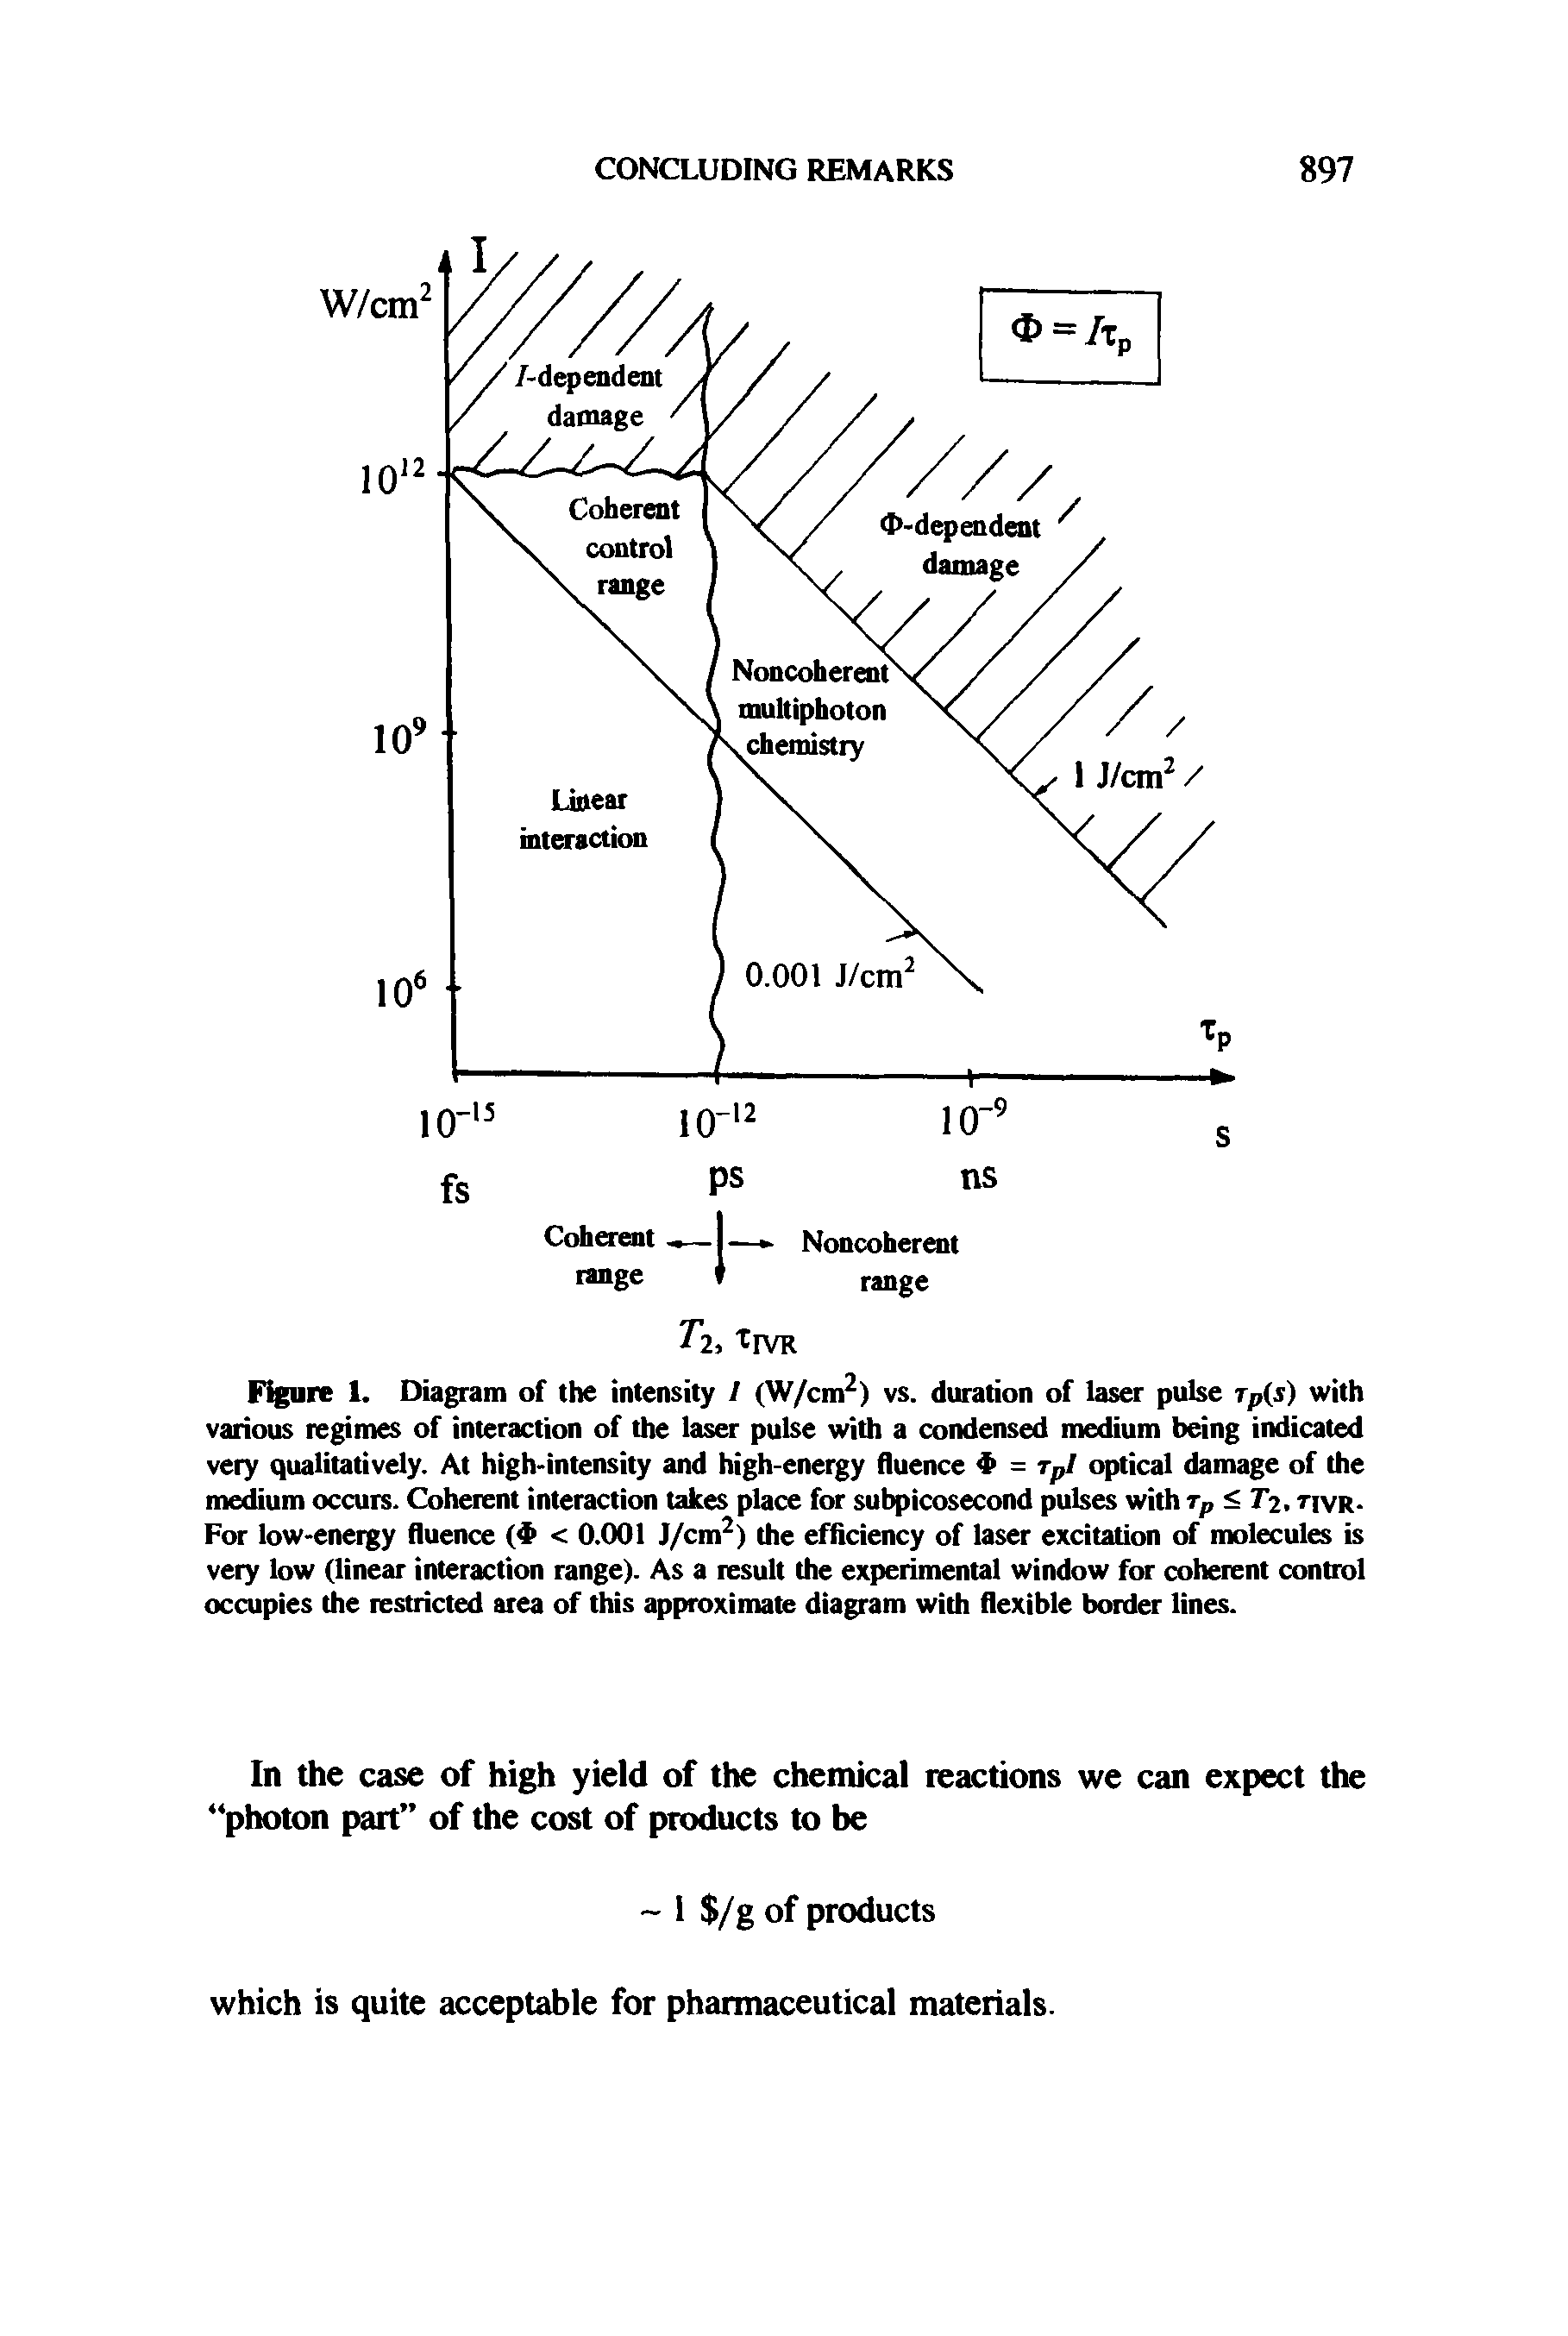 Figure 1. Diagram of the intensity / (W/cm2) vs. duration of laser pulse tp(s) with various regimes of interaction of the laser pulse with a condensed medium being indicated very qualitatively. At high-intensity and high-energy fluence 4> = rpI optical damage of the medium occurs. Coherent interaction takes place for subpicosecond pulses with tp < Ti, tivr. For low-eneigy fluence (4> < 0.001 J/cm2) the efficiency of laser excitation of molecules is very low (linear interaction range). As a result the experimental window for coherent control occupies the restricted area of this approximate diagram with flexible border lines.